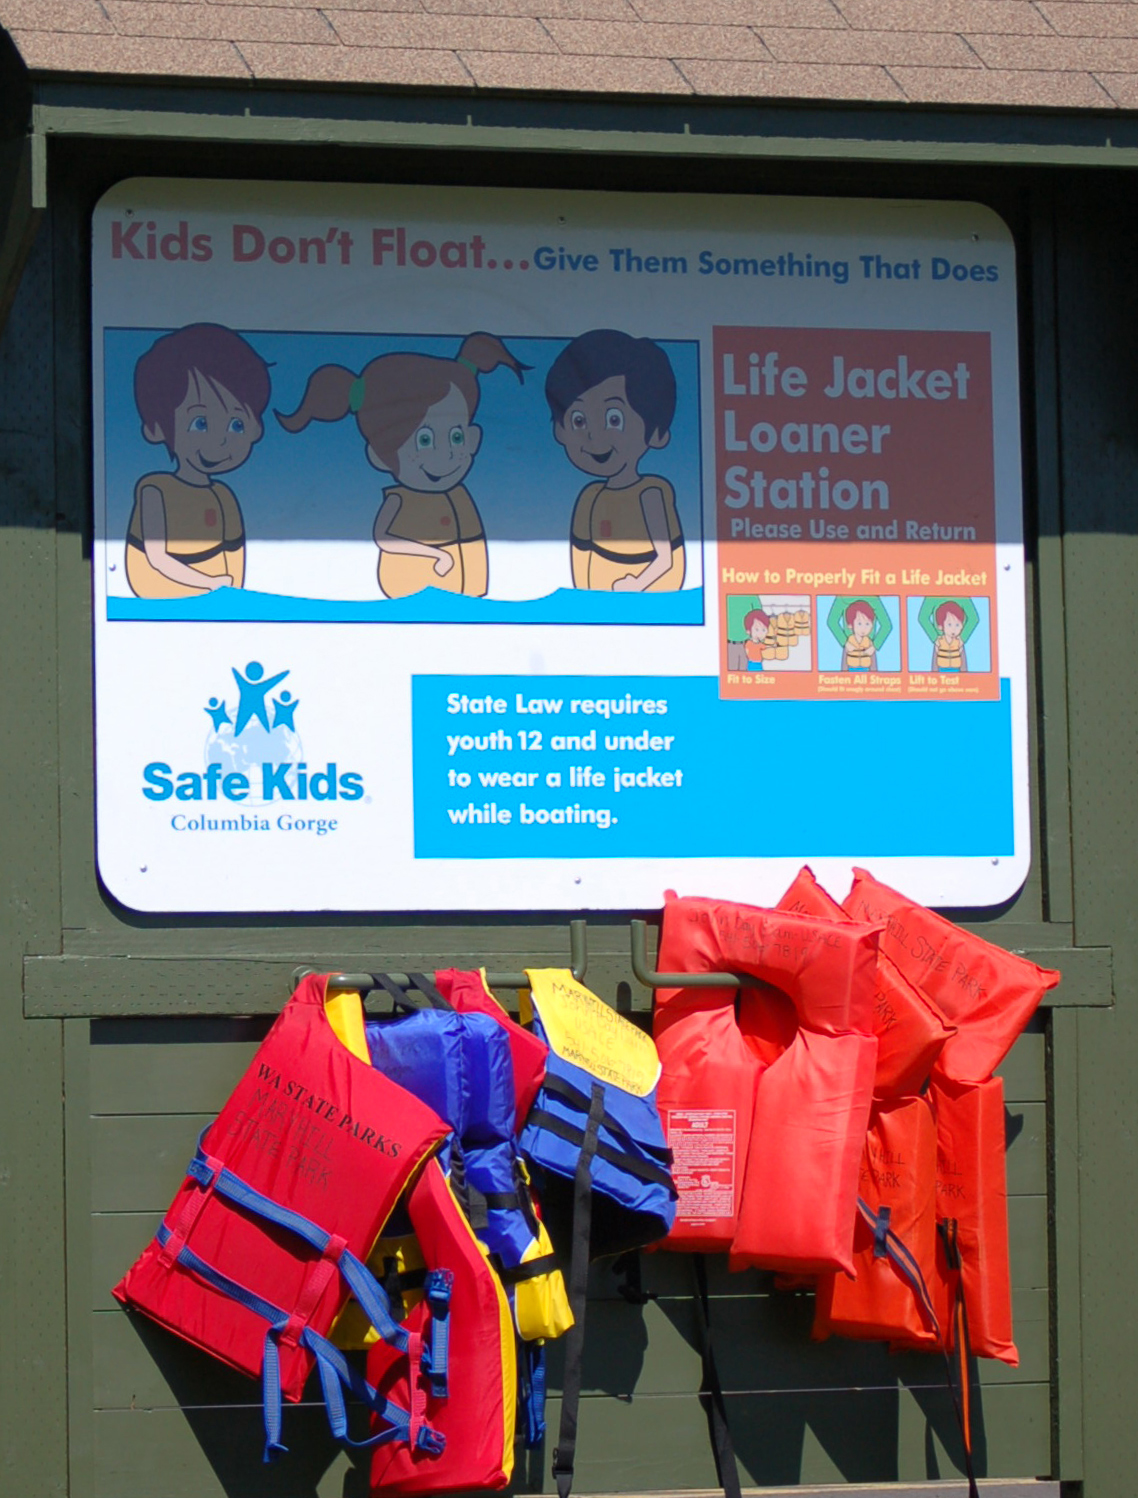 State Laws and Regulations for Wearing Life Jackets